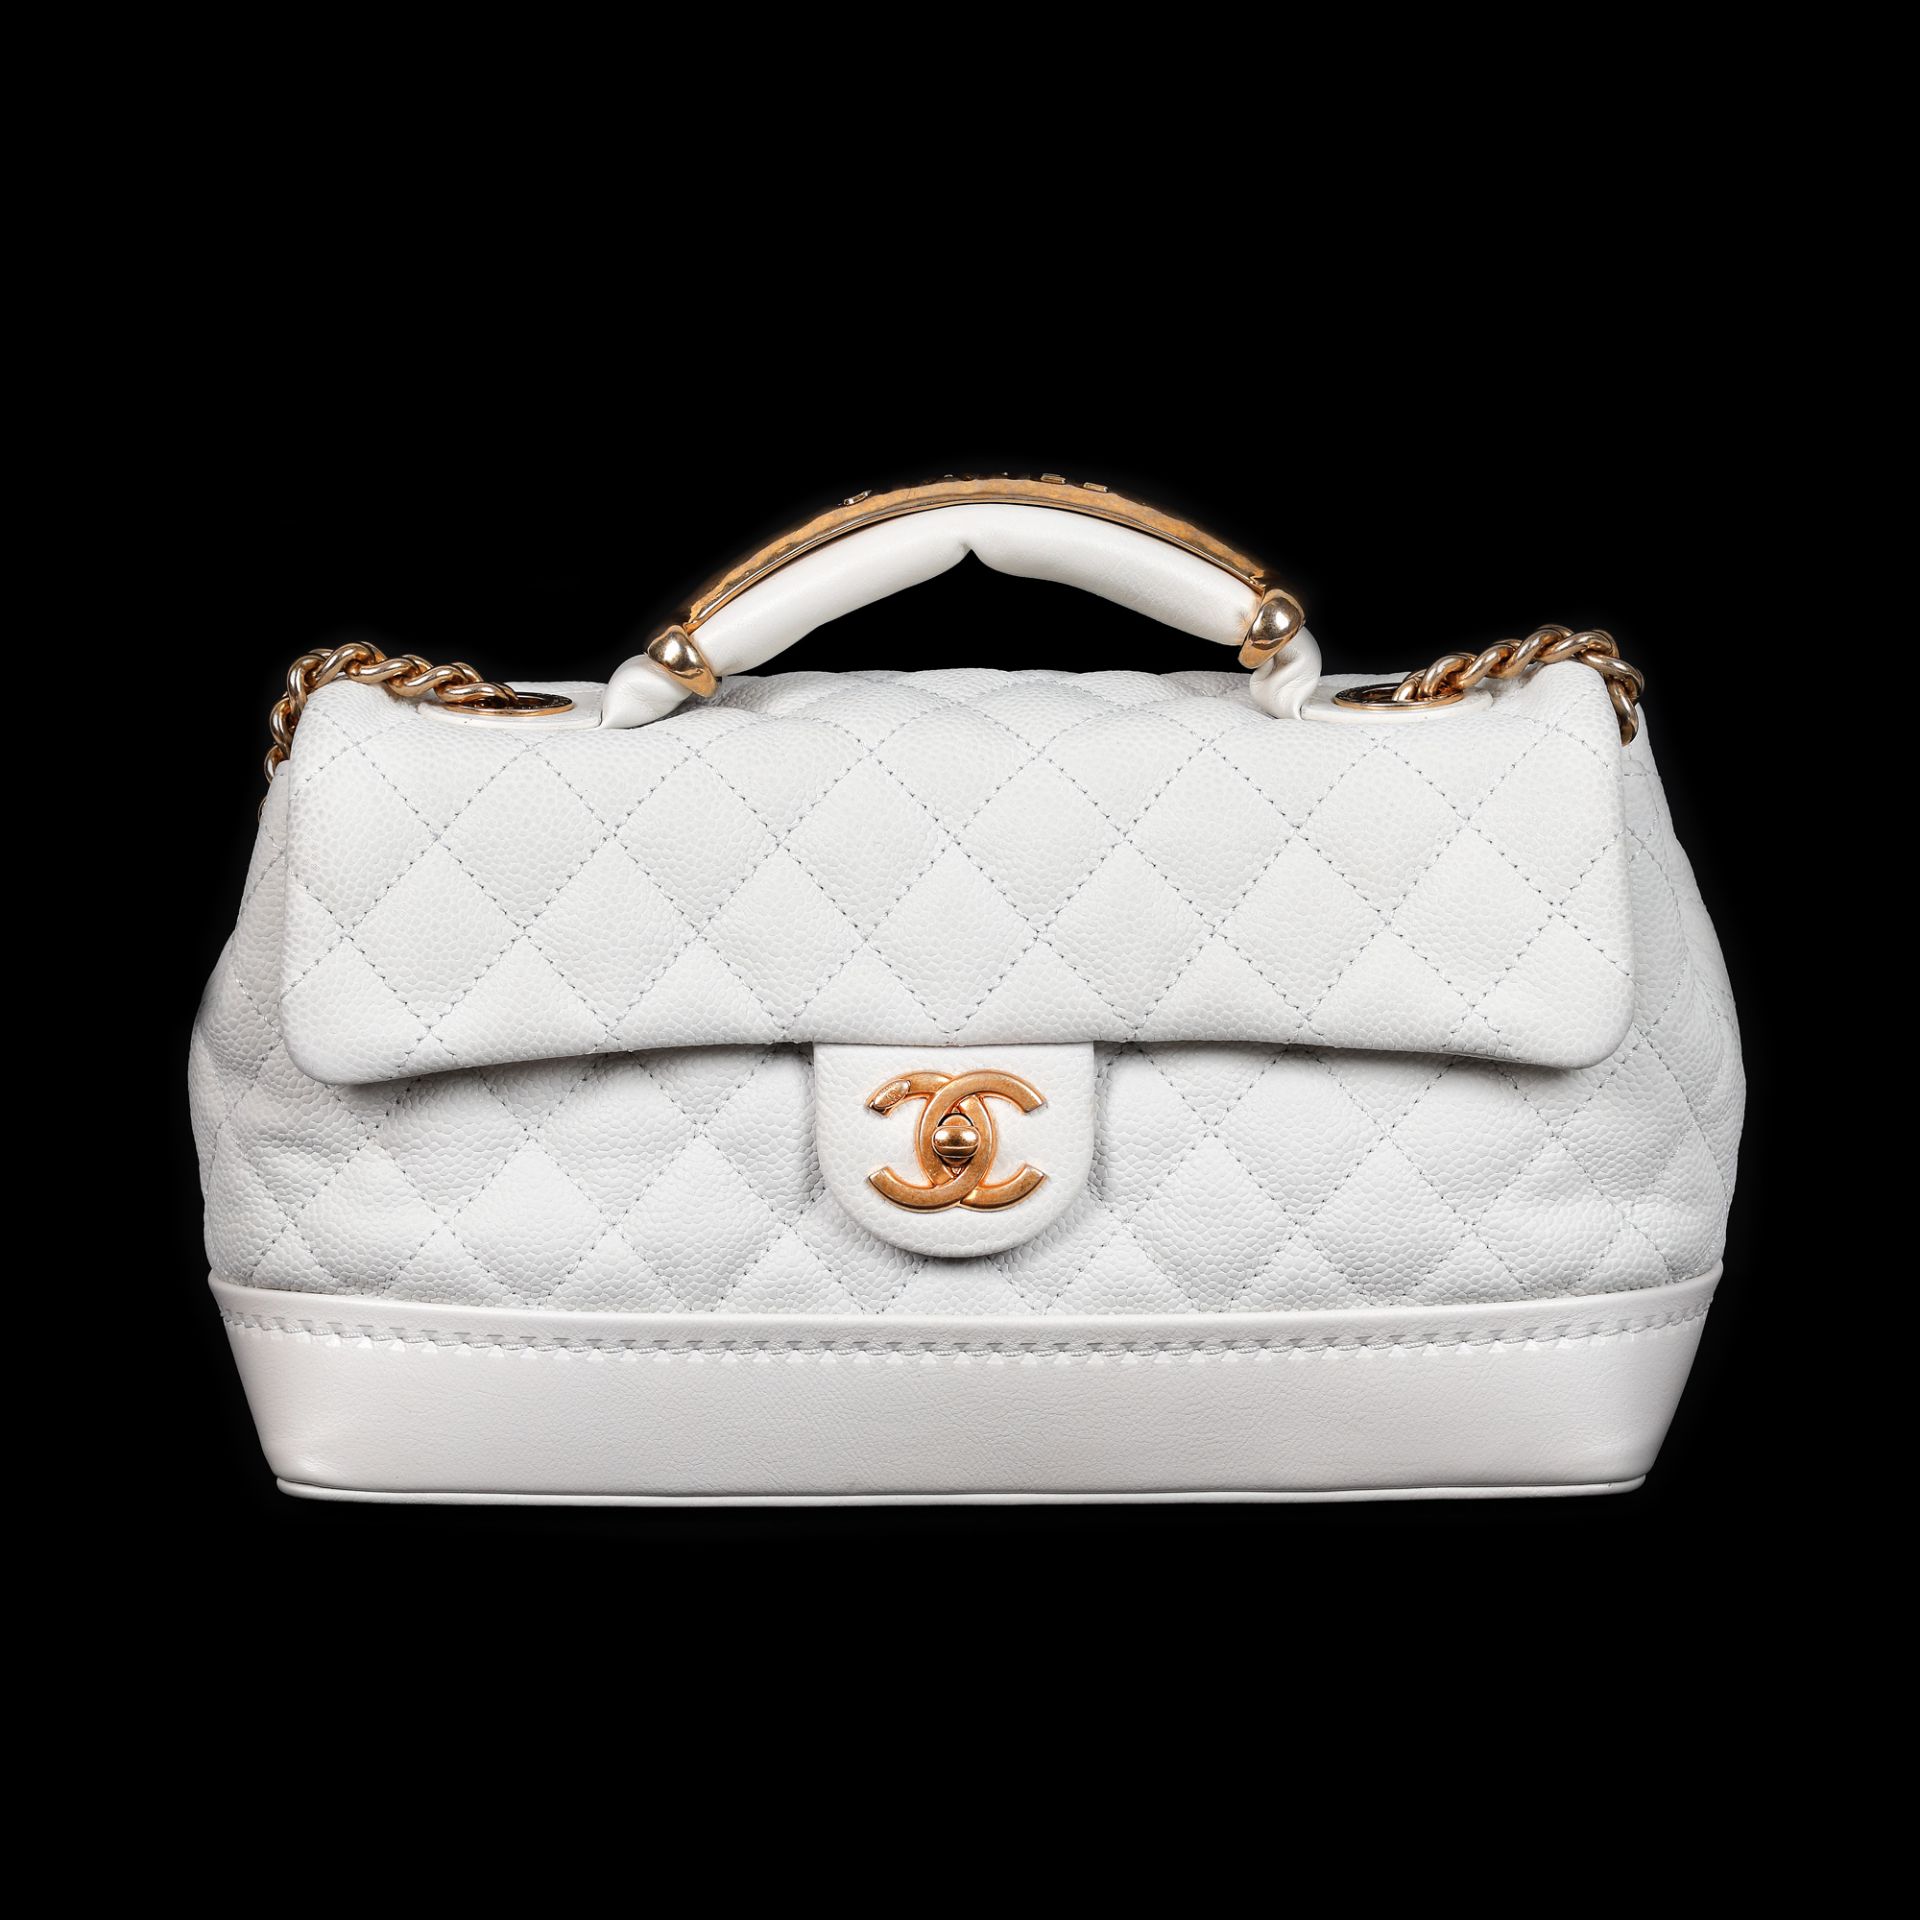 "Globe Trotter Flap" - Chanel bag, quilted leather, white